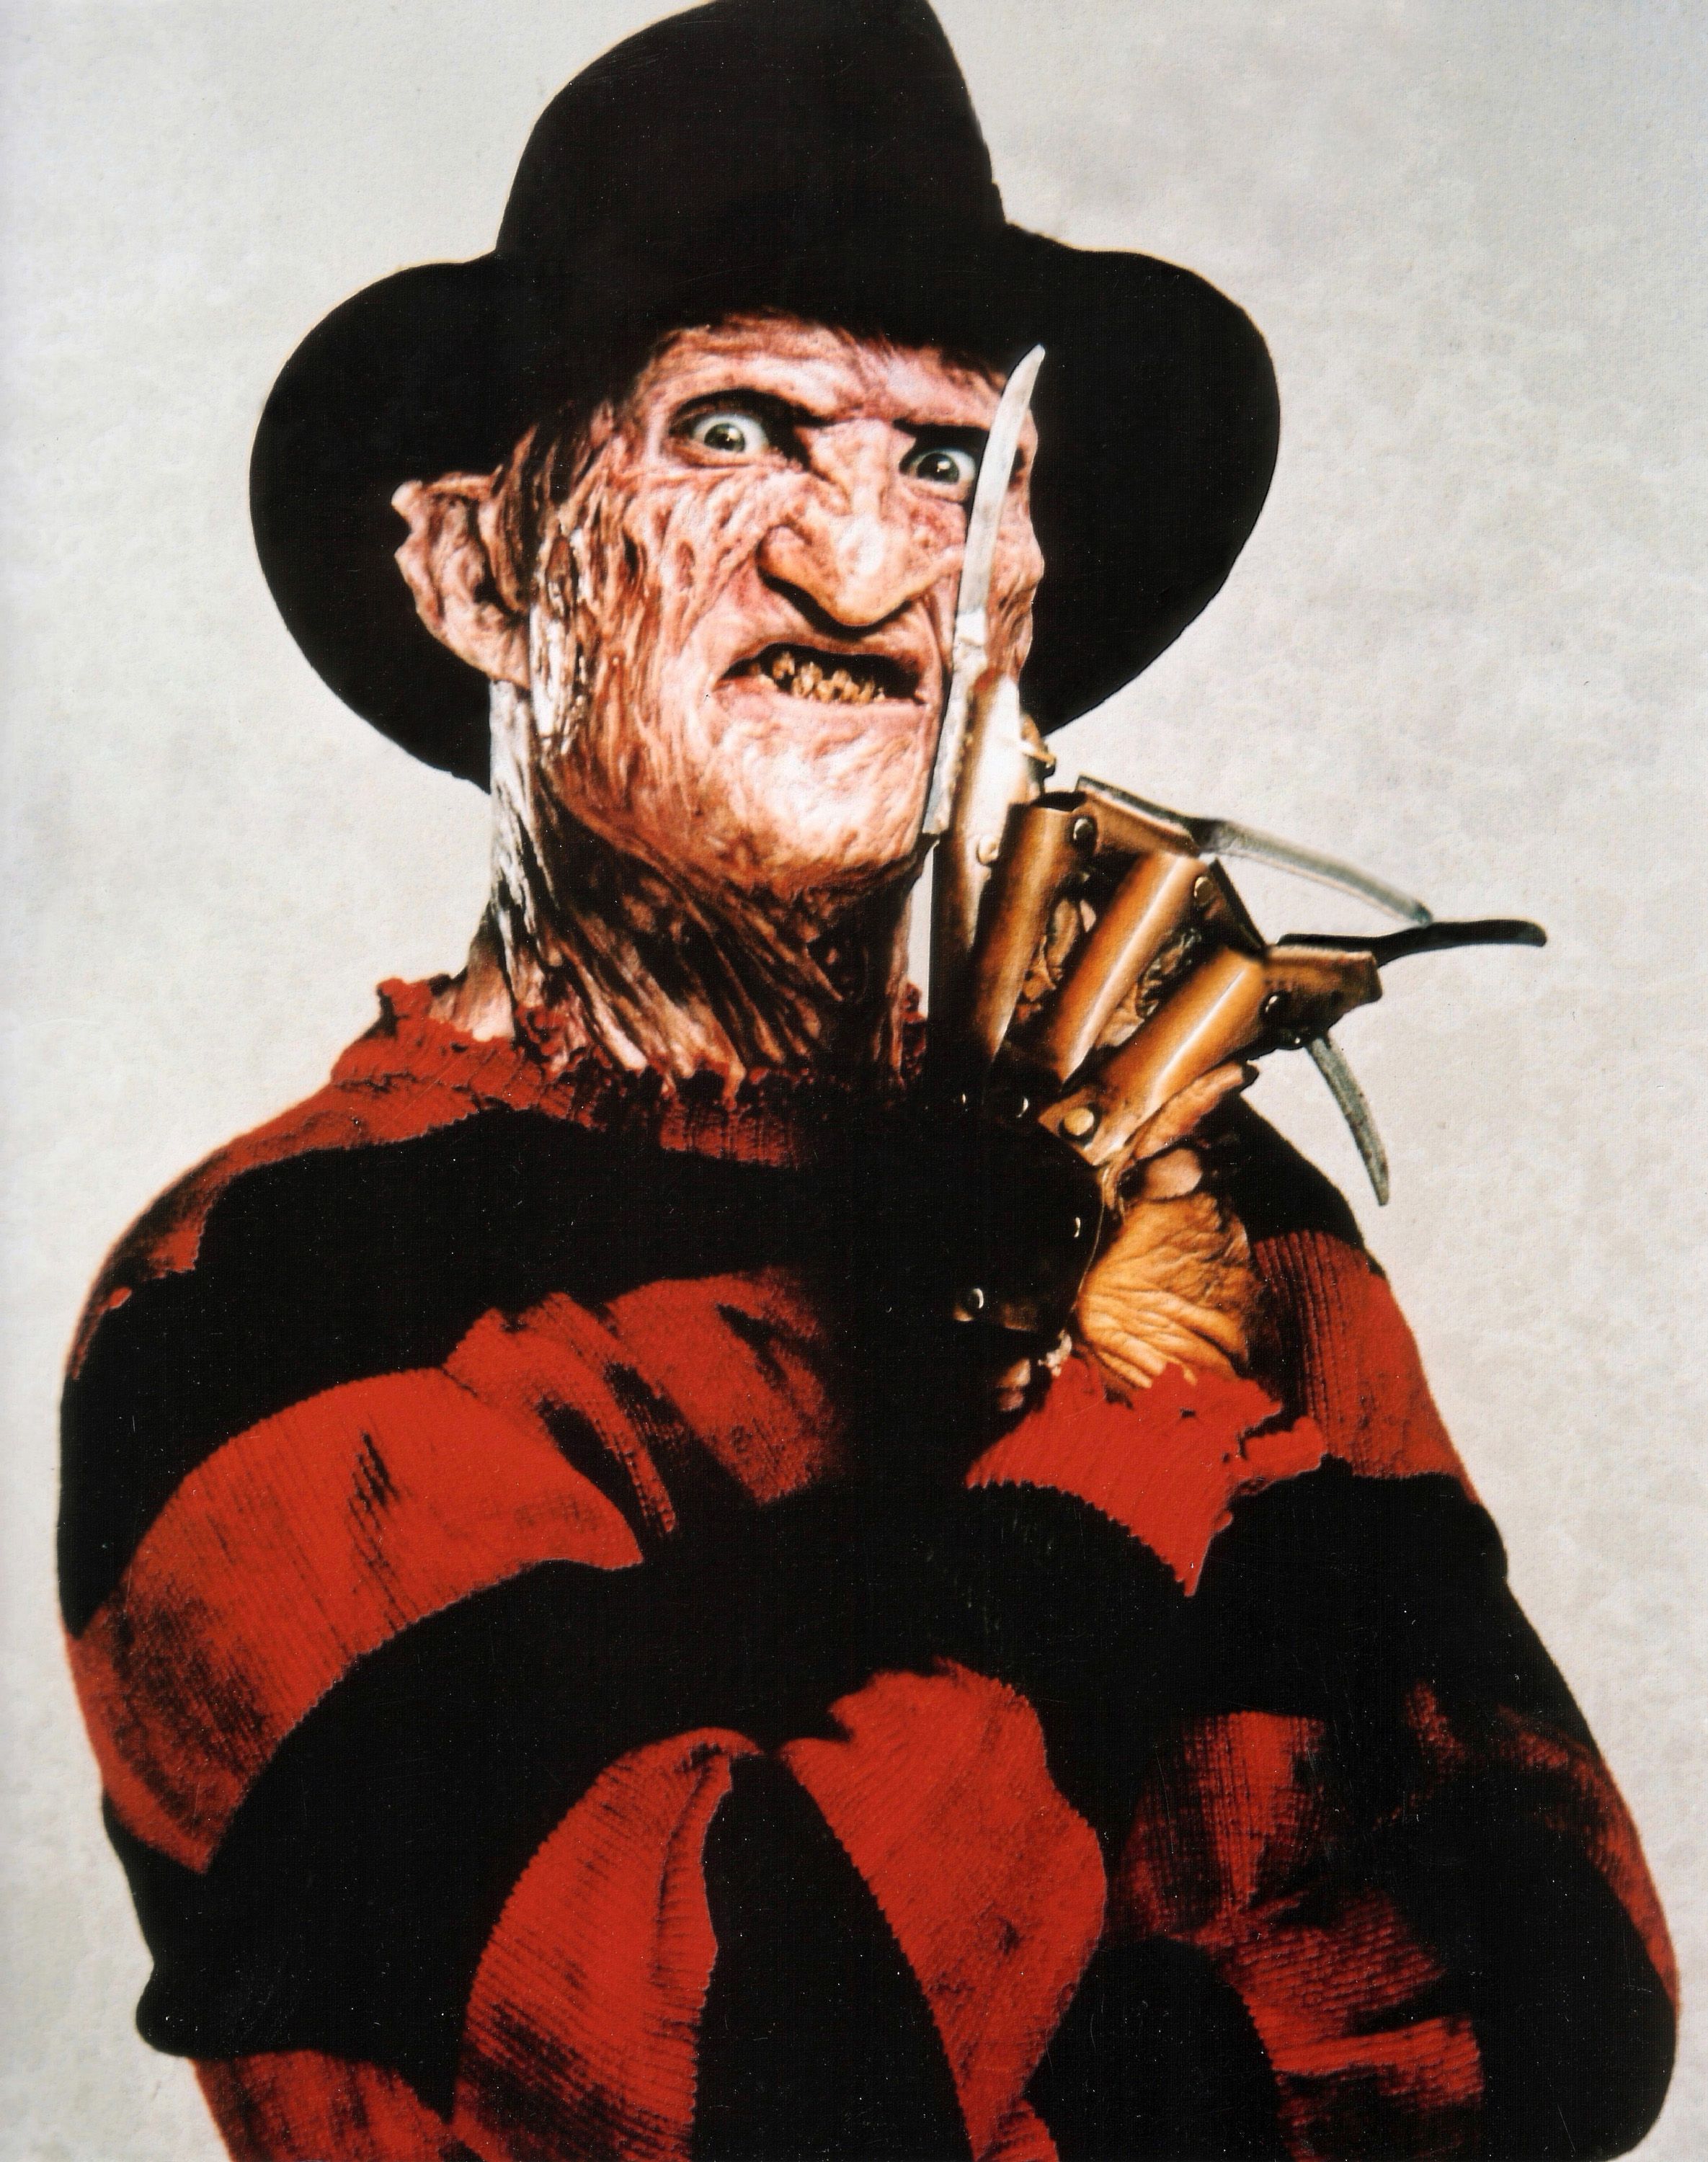 The Original Freddy Krueger Is Returning On Tv Just Not In The Way You D Expect